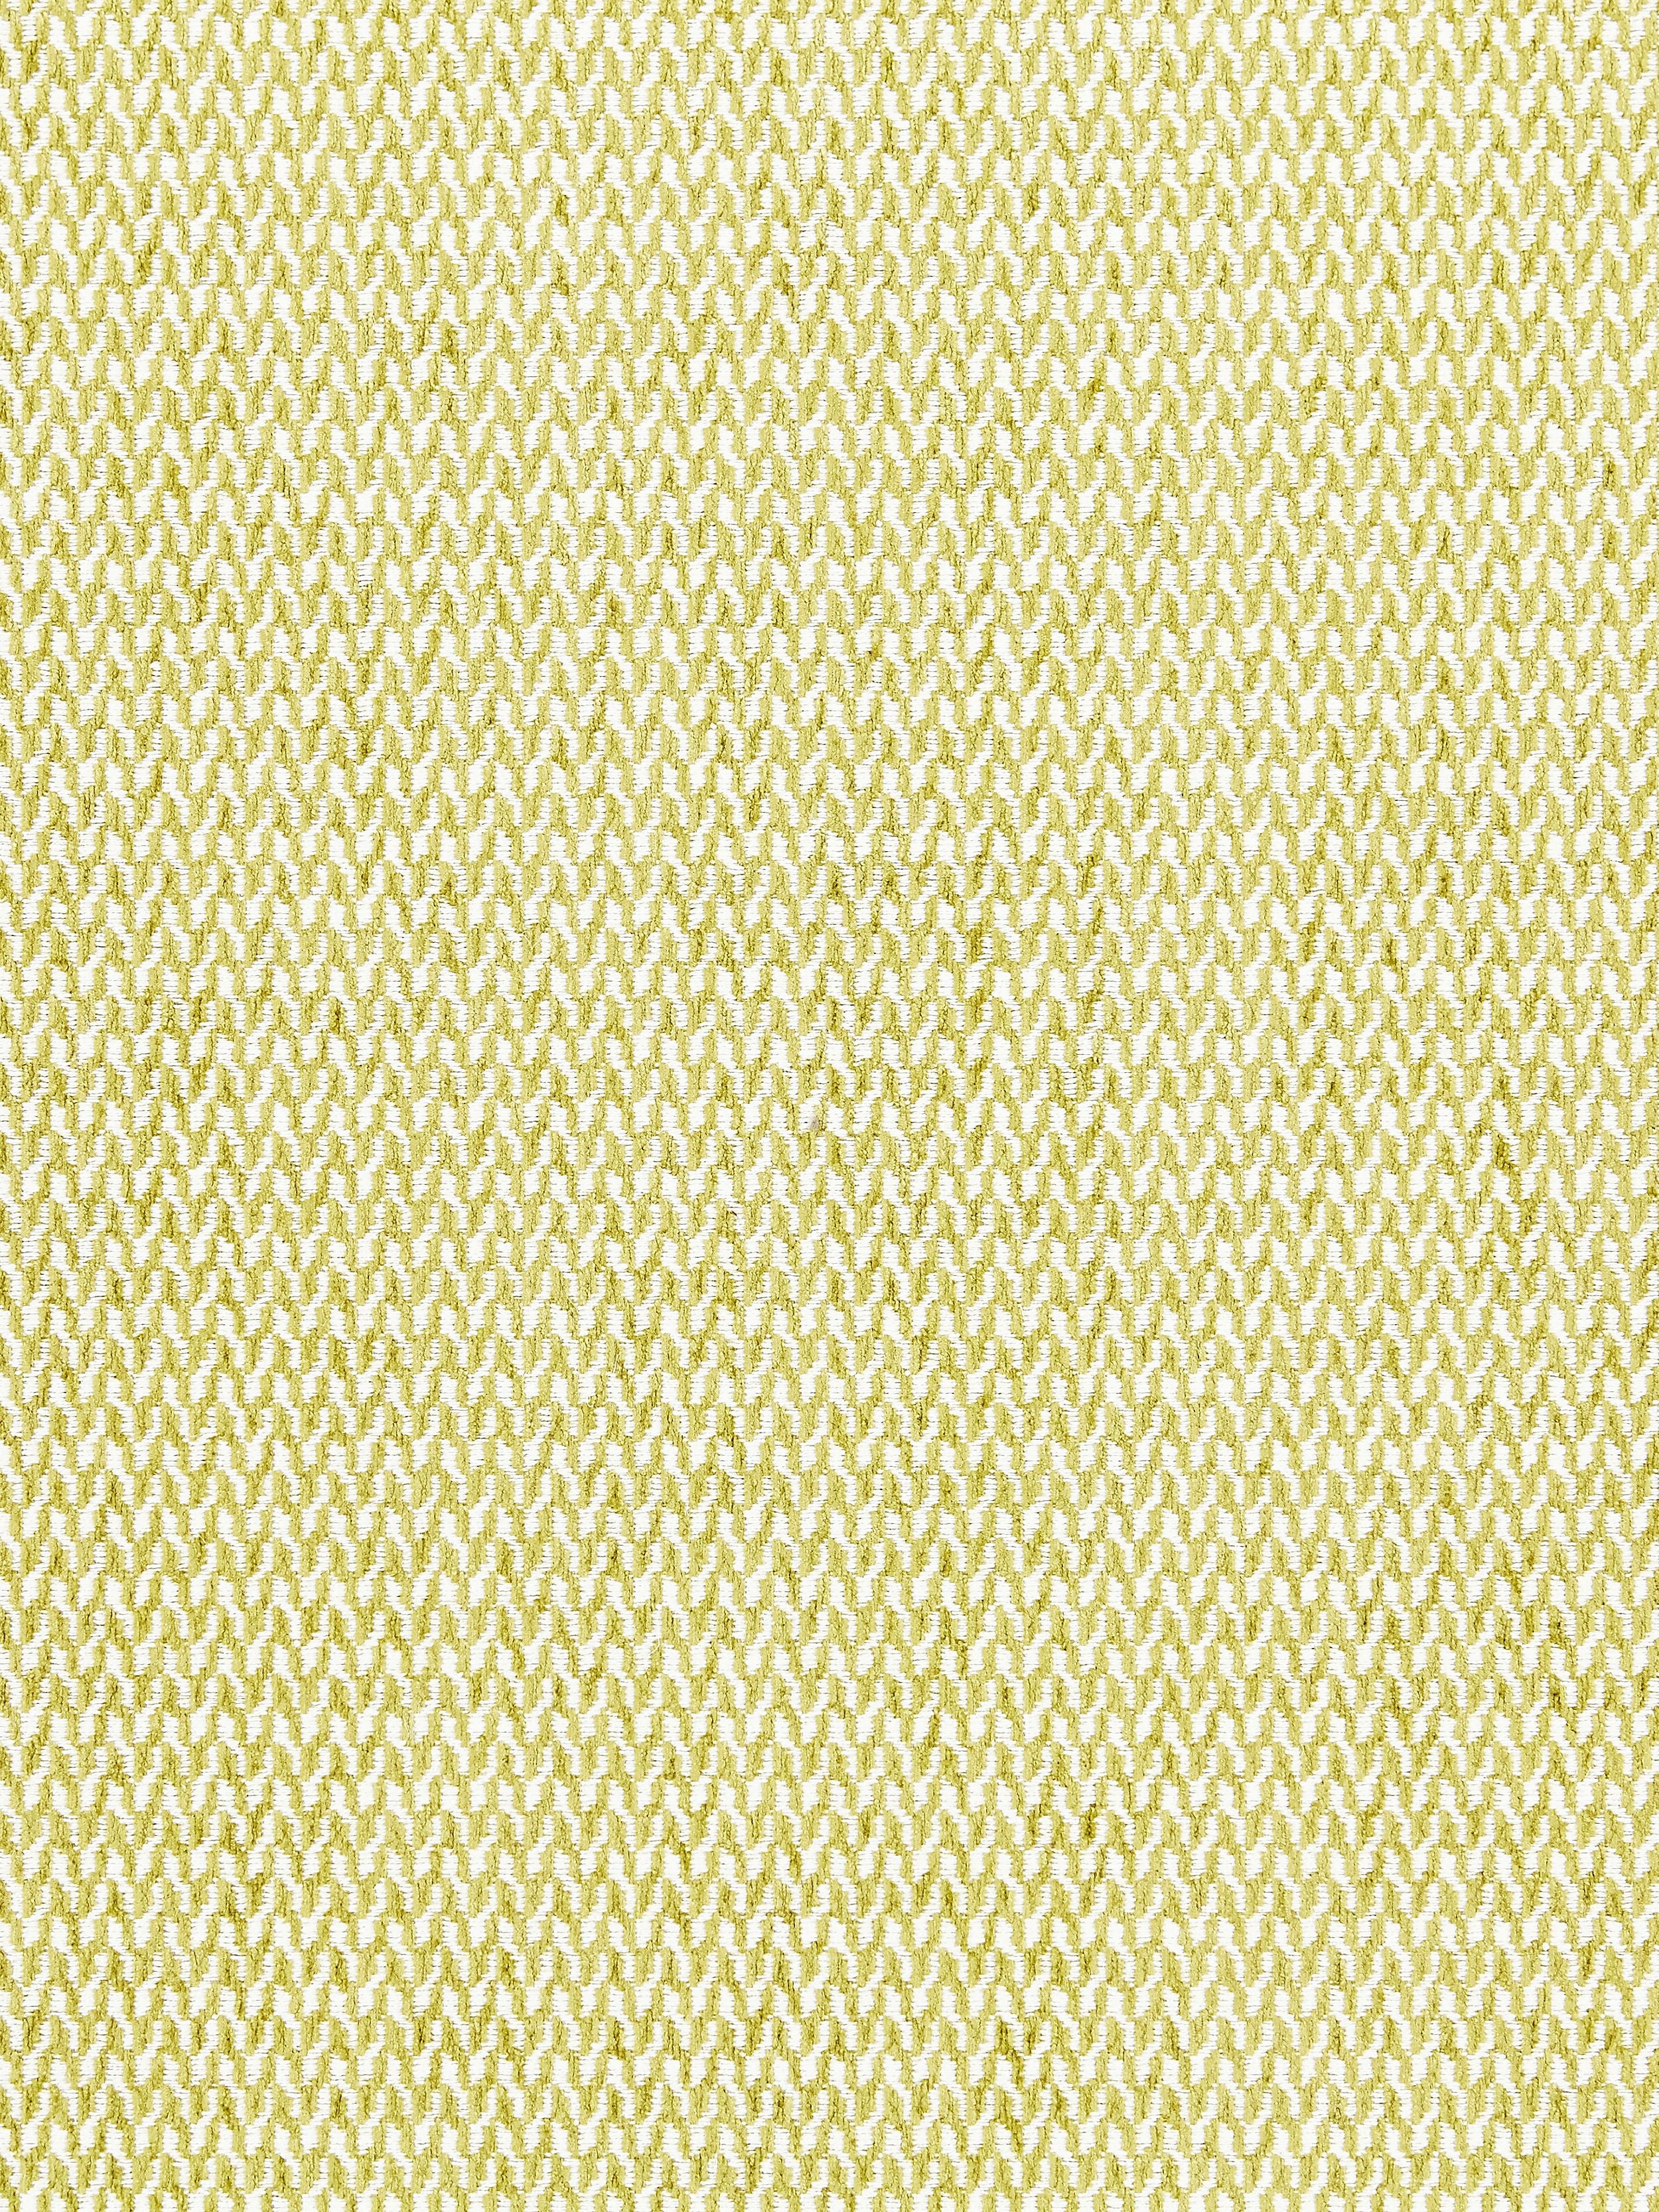 Cortona Chenille fabric in fern color - pattern number SC 000327104 - by Scalamandre in the Scalamandre Fabrics Book 1 collection